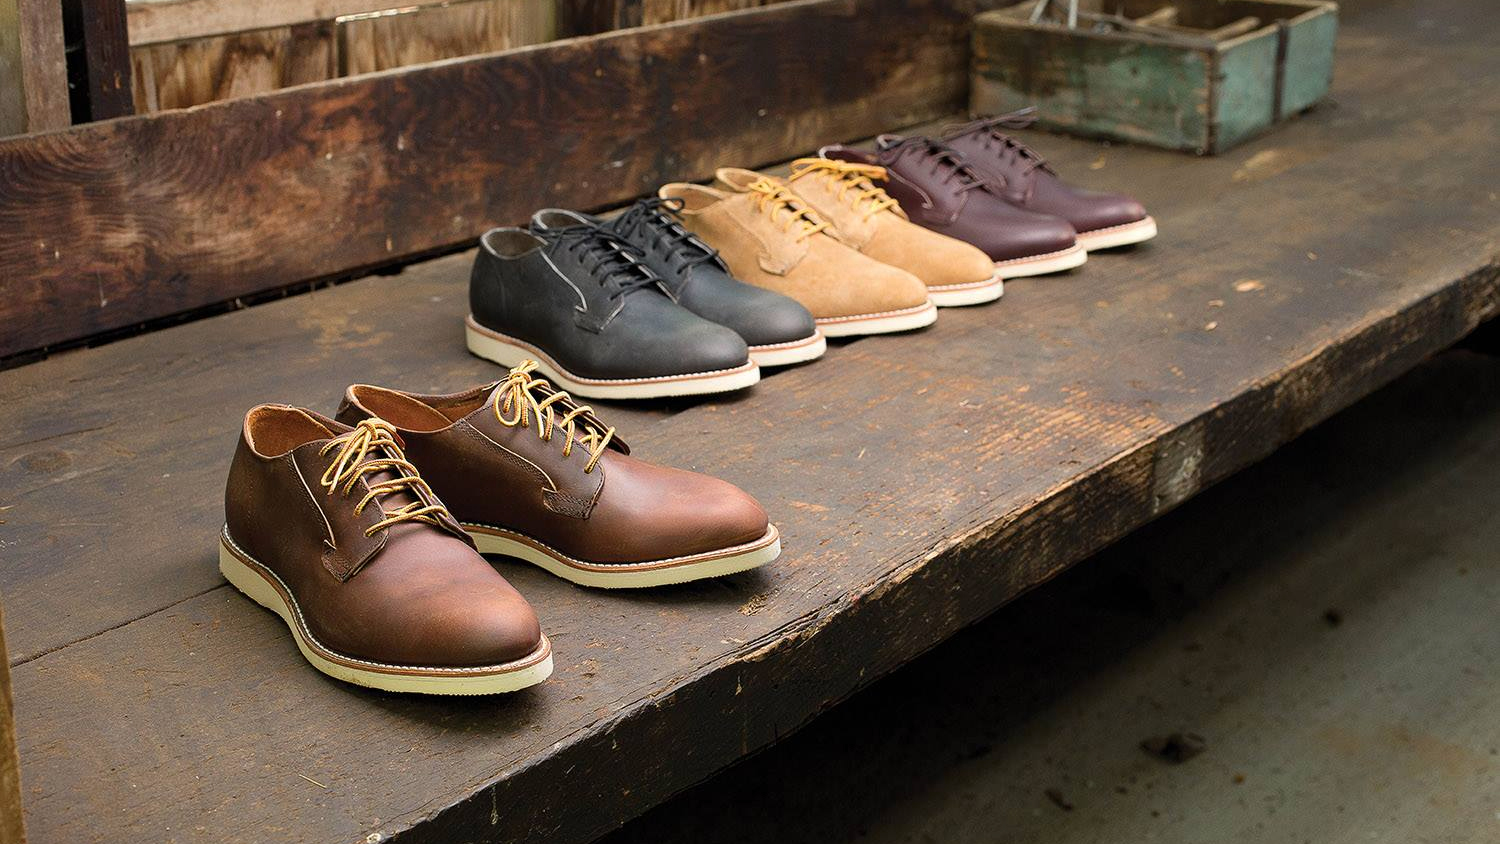 via Bestået sløring Study Up on Spring Shoe Style with Red Wing Heritage - The Manual